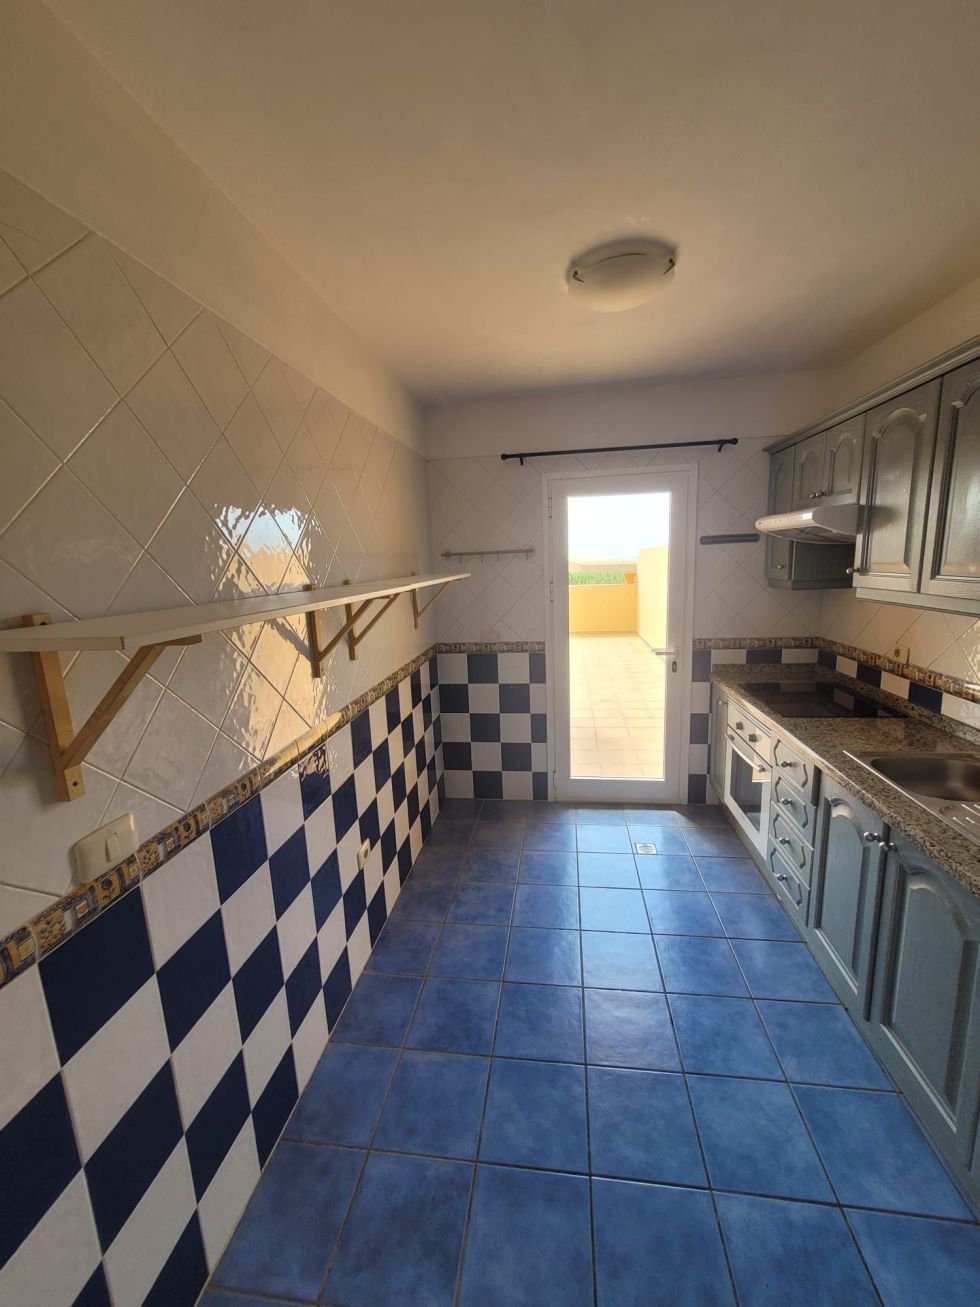 Townhouse for sale in  Callao Salvaje, Spain